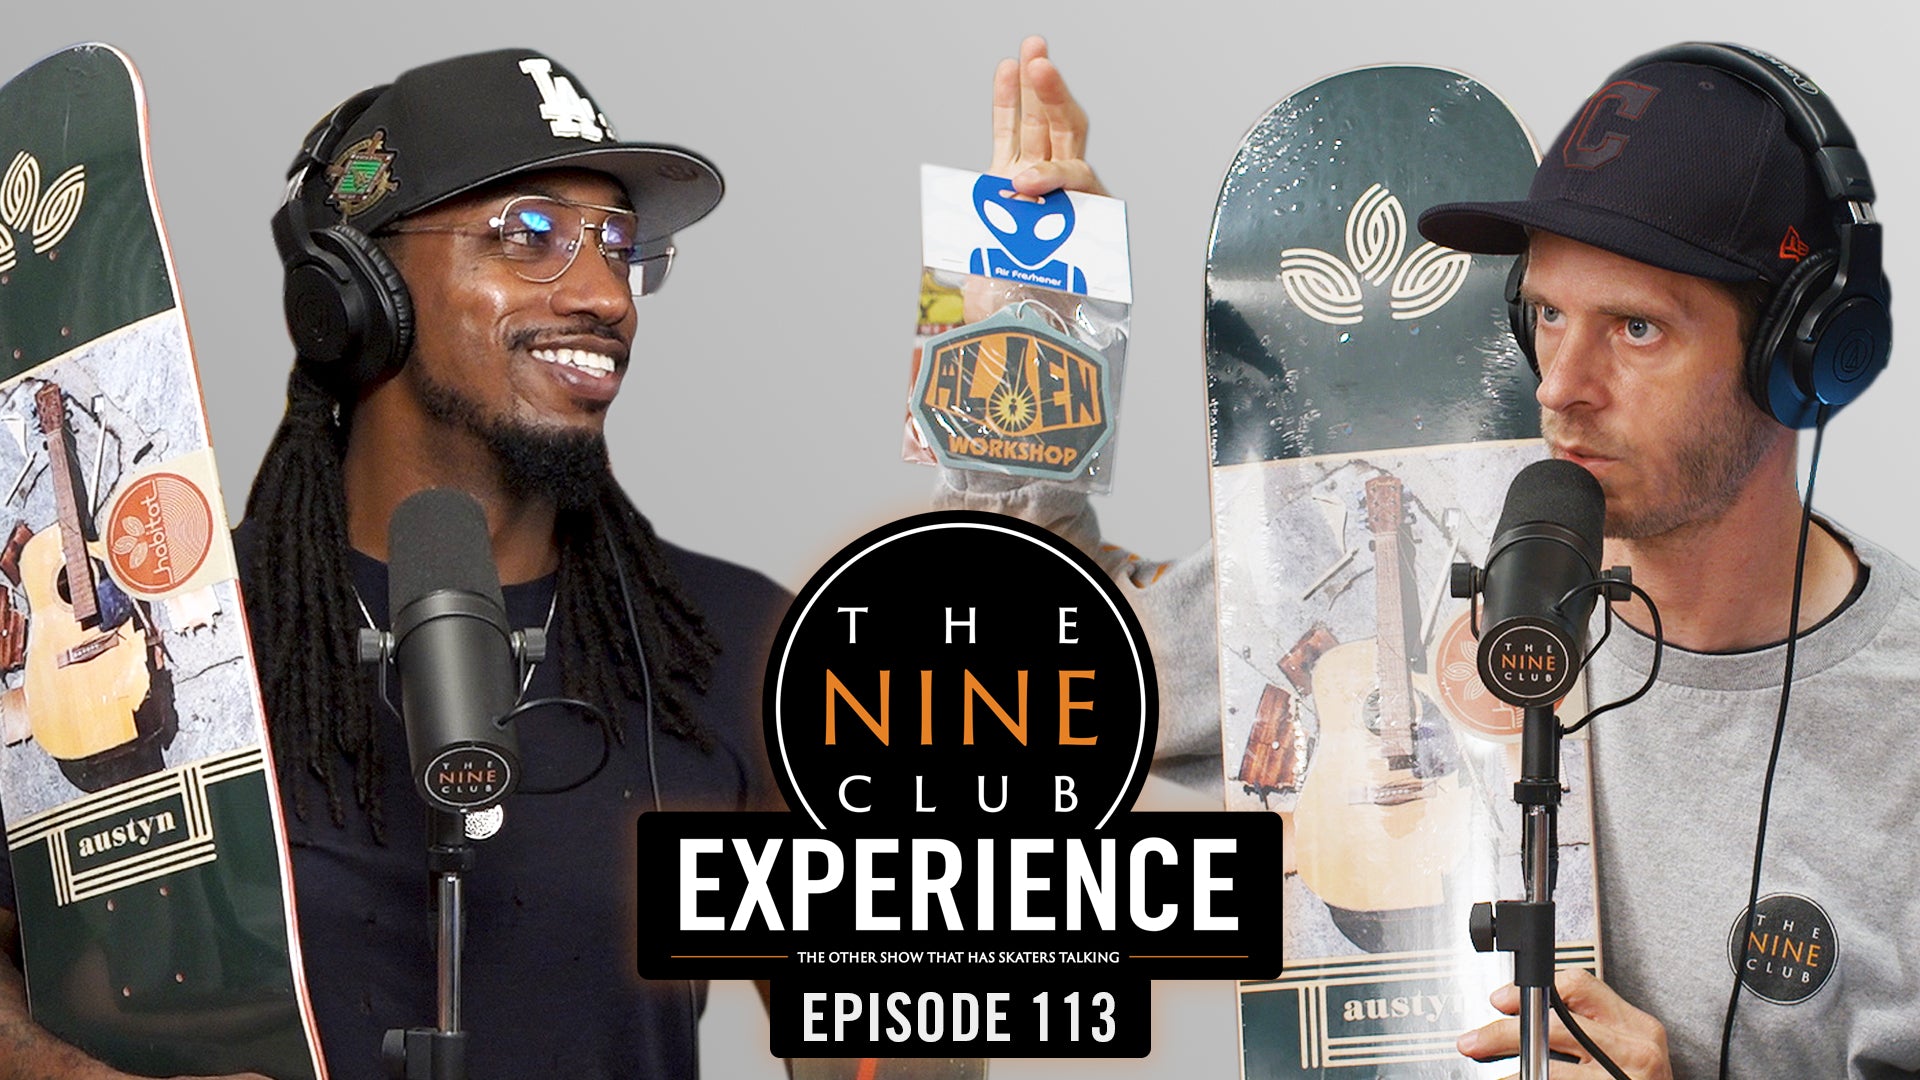 The Nine Club Experience Episode 113